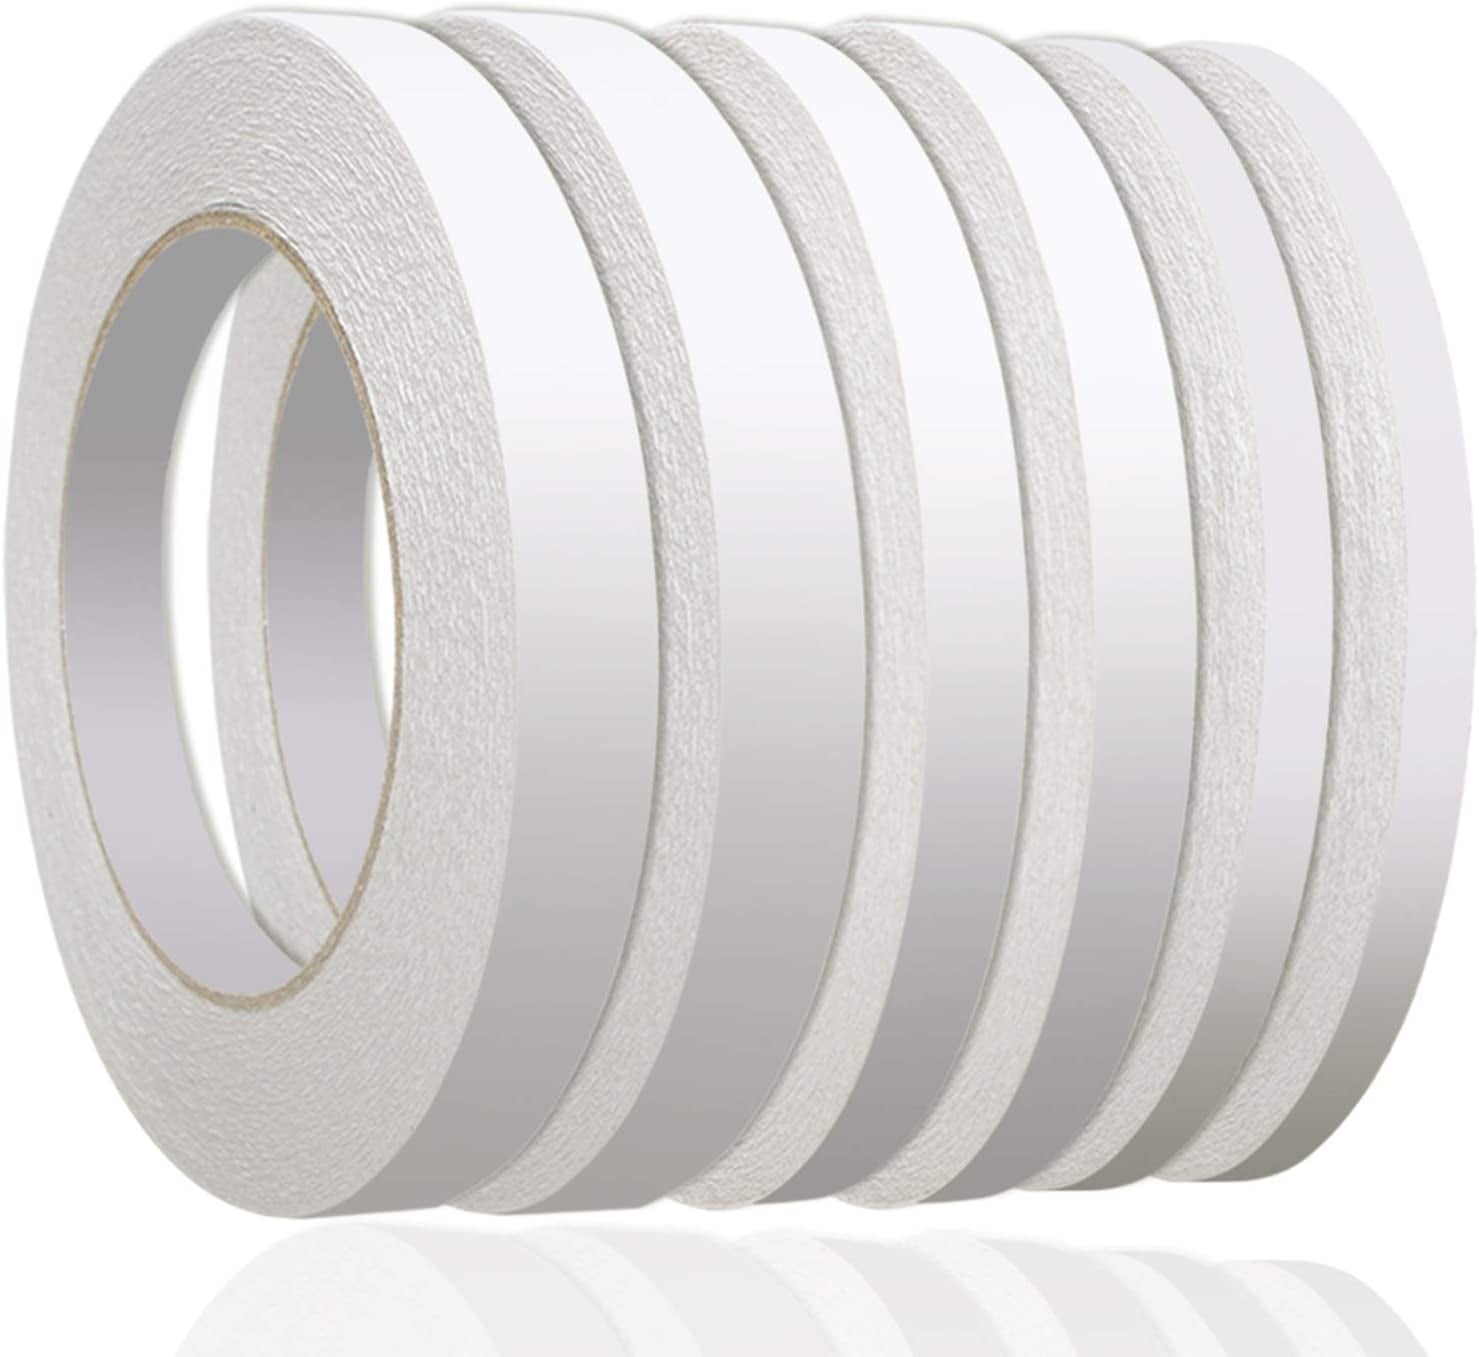 5 Rolls 1/8″ Double Sided Tape for Crafts, 82Ft per Roll